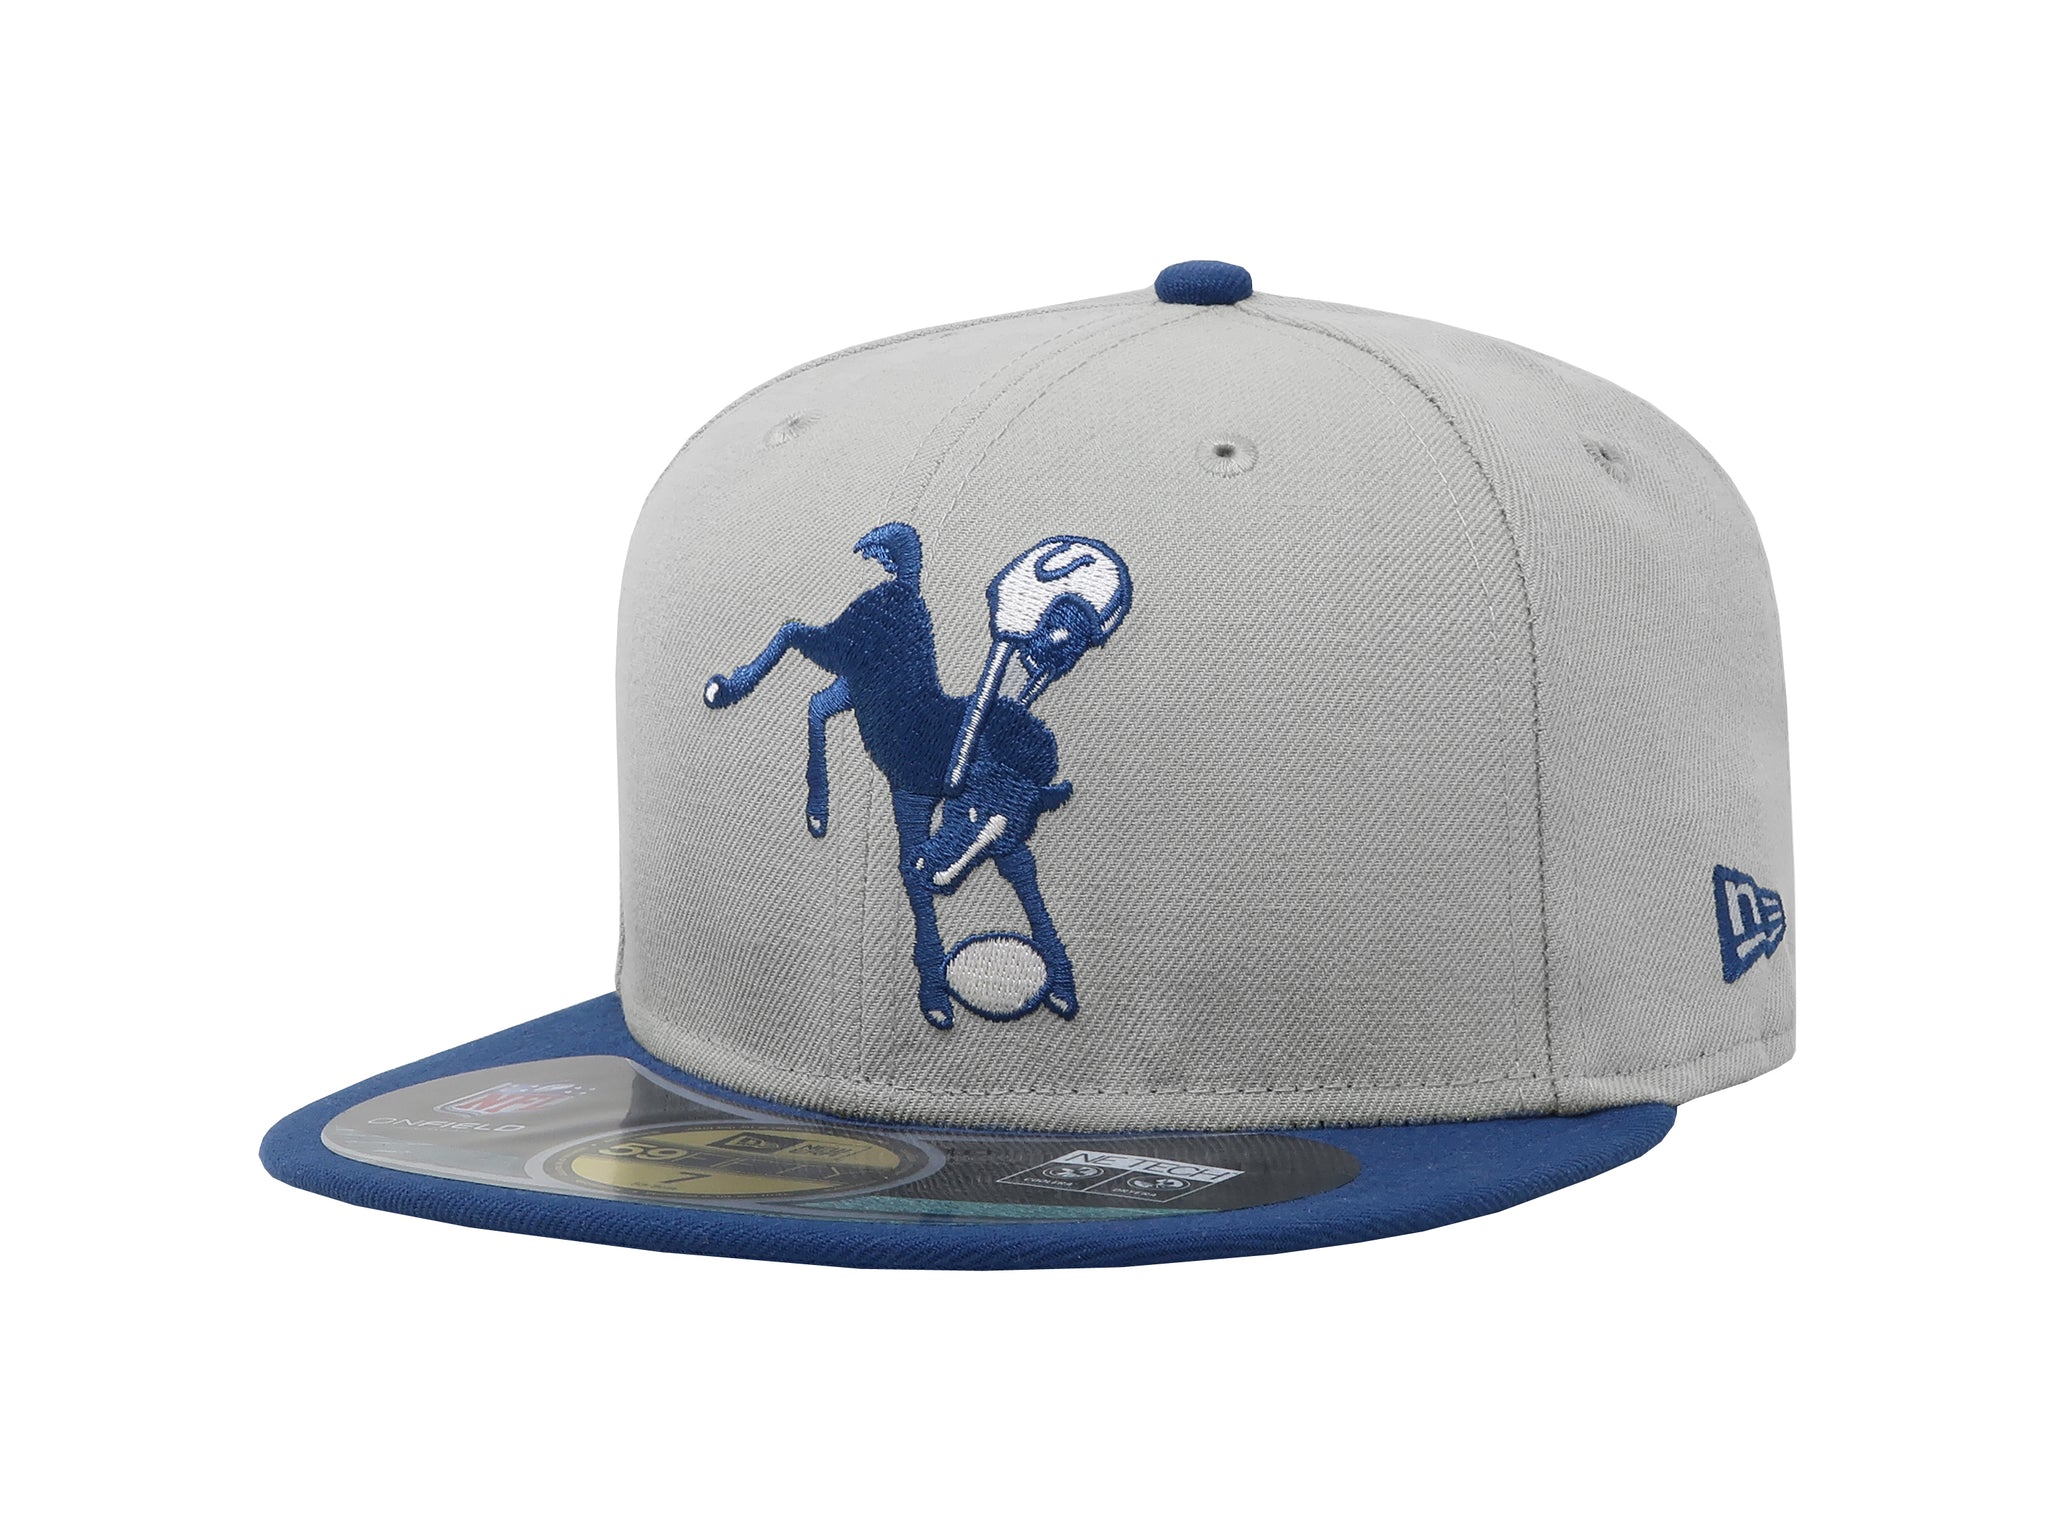 New Era 59Fifty Men's Indianapolis Colts Grey/Royal Fitted Cap